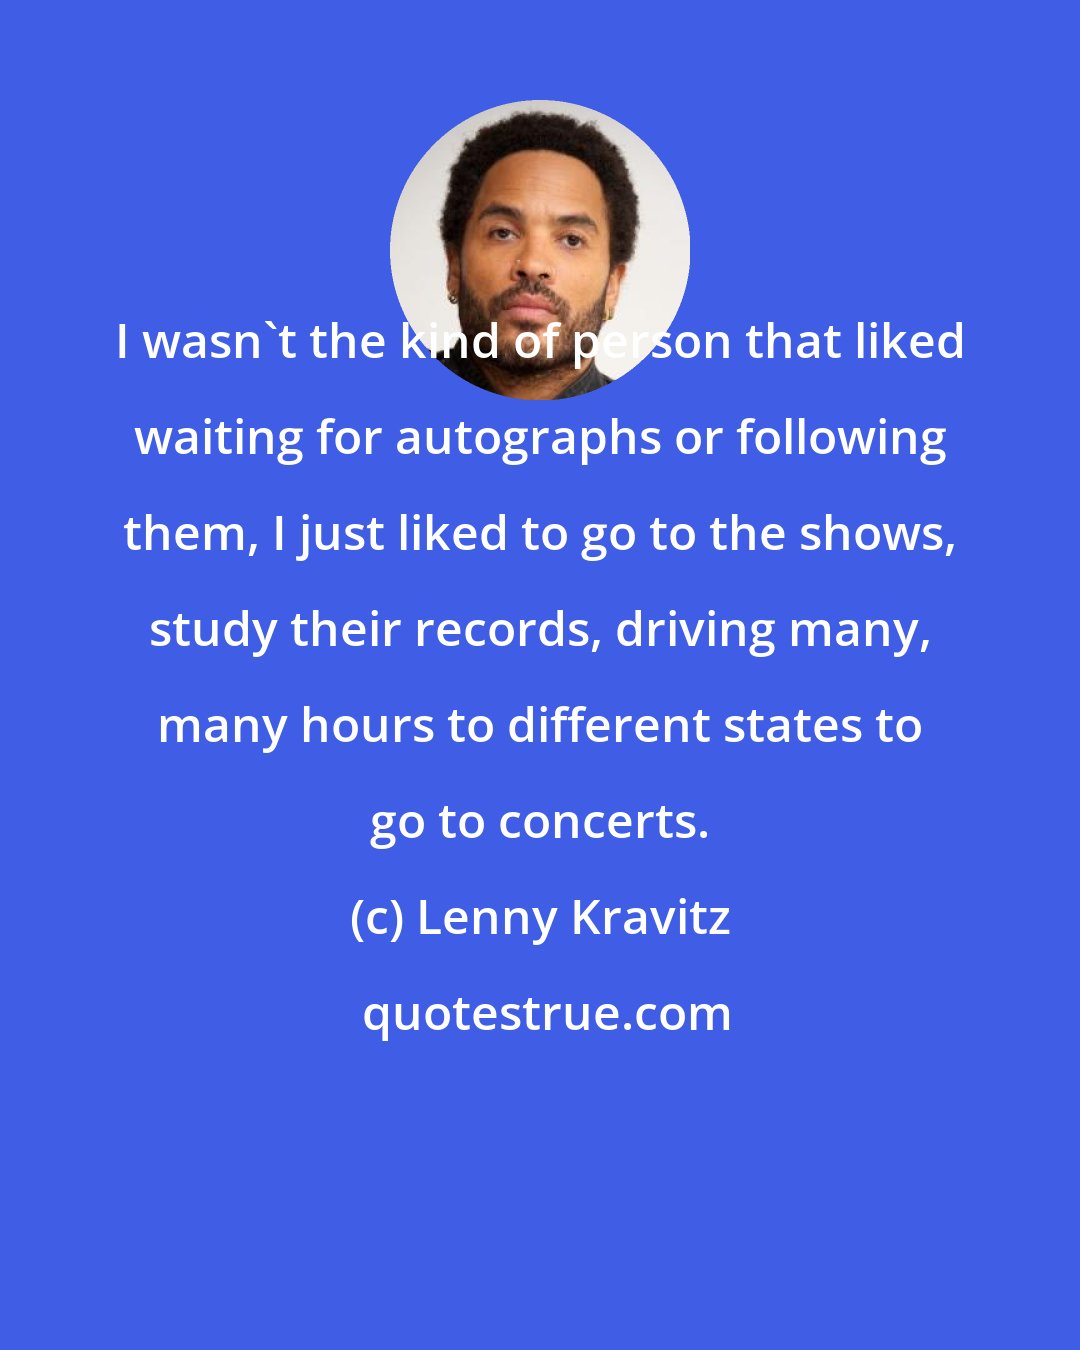 Lenny Kravitz: I wasn't the kind of person that liked waiting for autographs or following them, I just liked to go to the shows, study their records, driving many, many hours to different states to go to concerts.